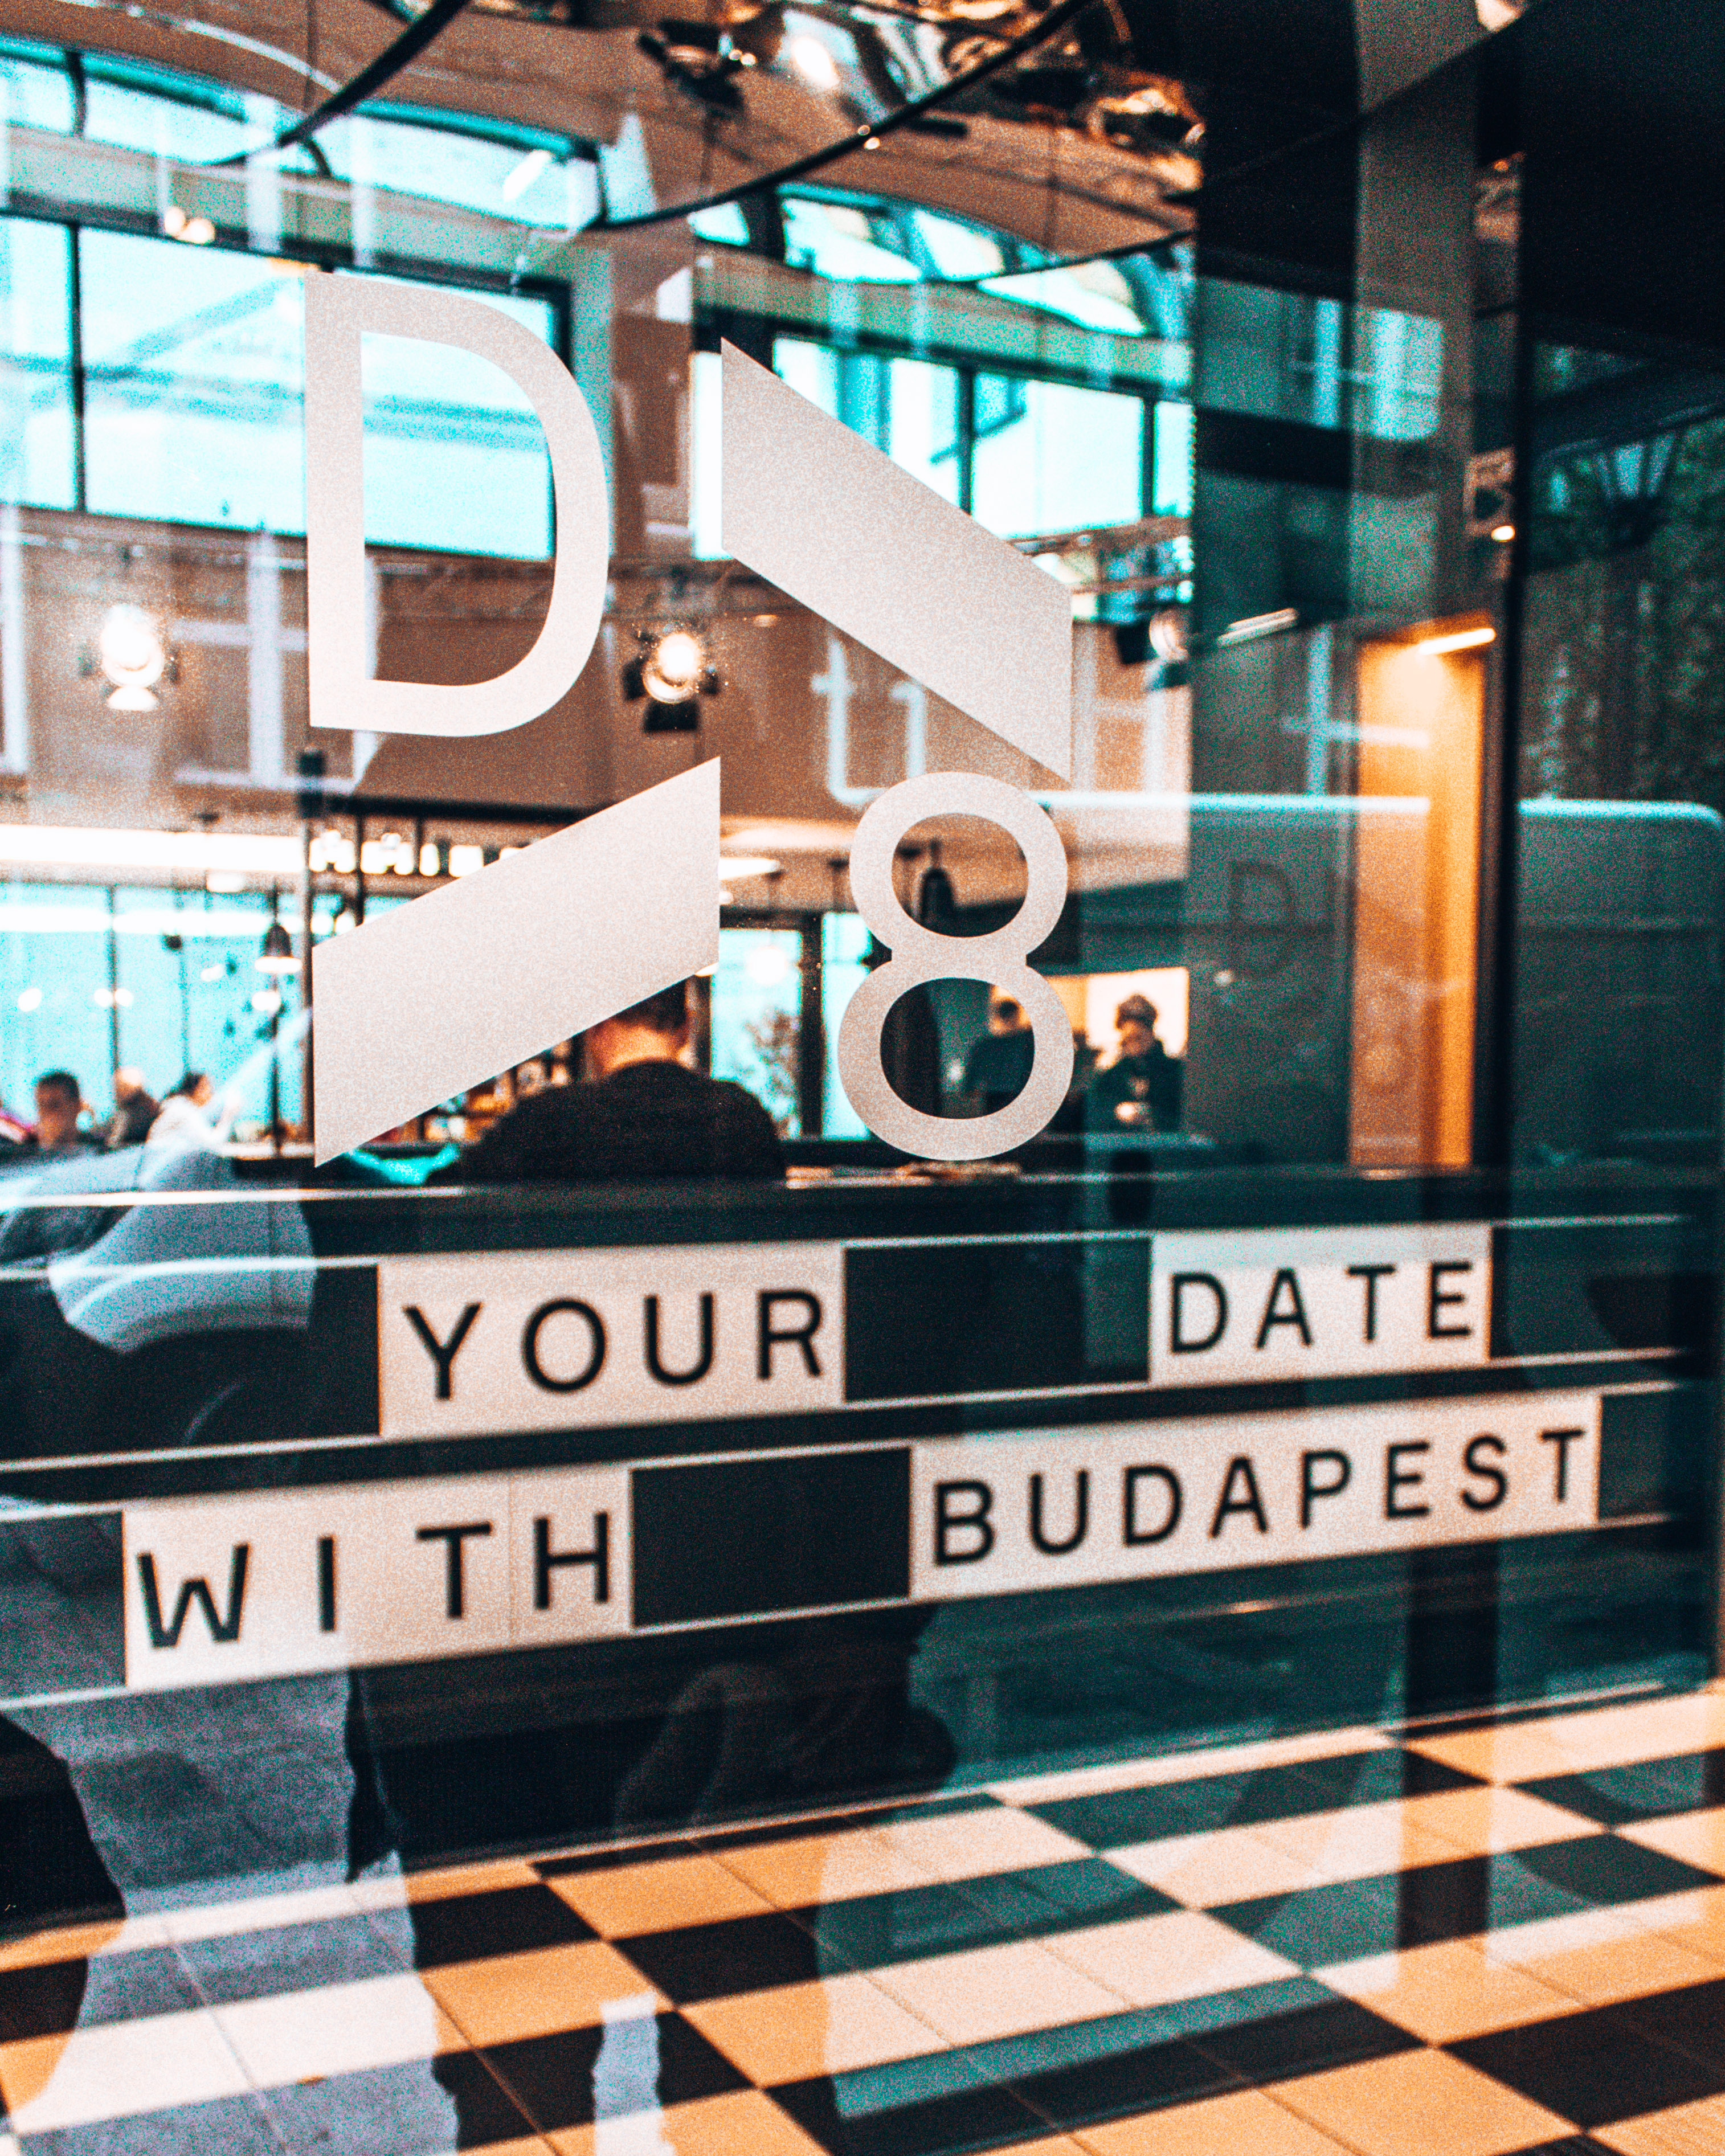 Welcome to the D8 Hotel in Budapest, Hungary